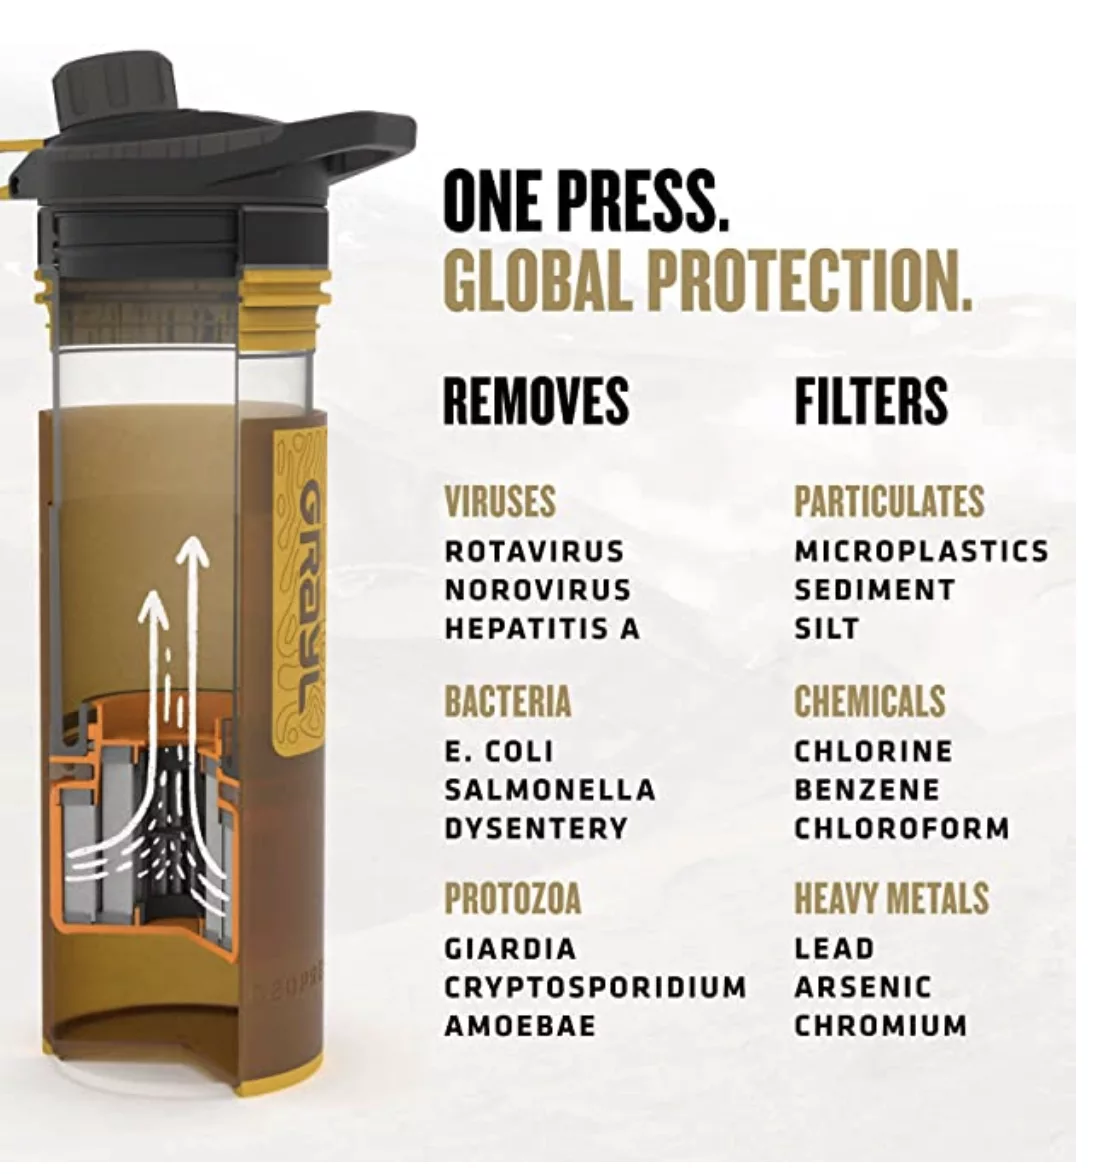 The New And Advanced Grayl Geopress 24 Oz Water Purifier Bottle